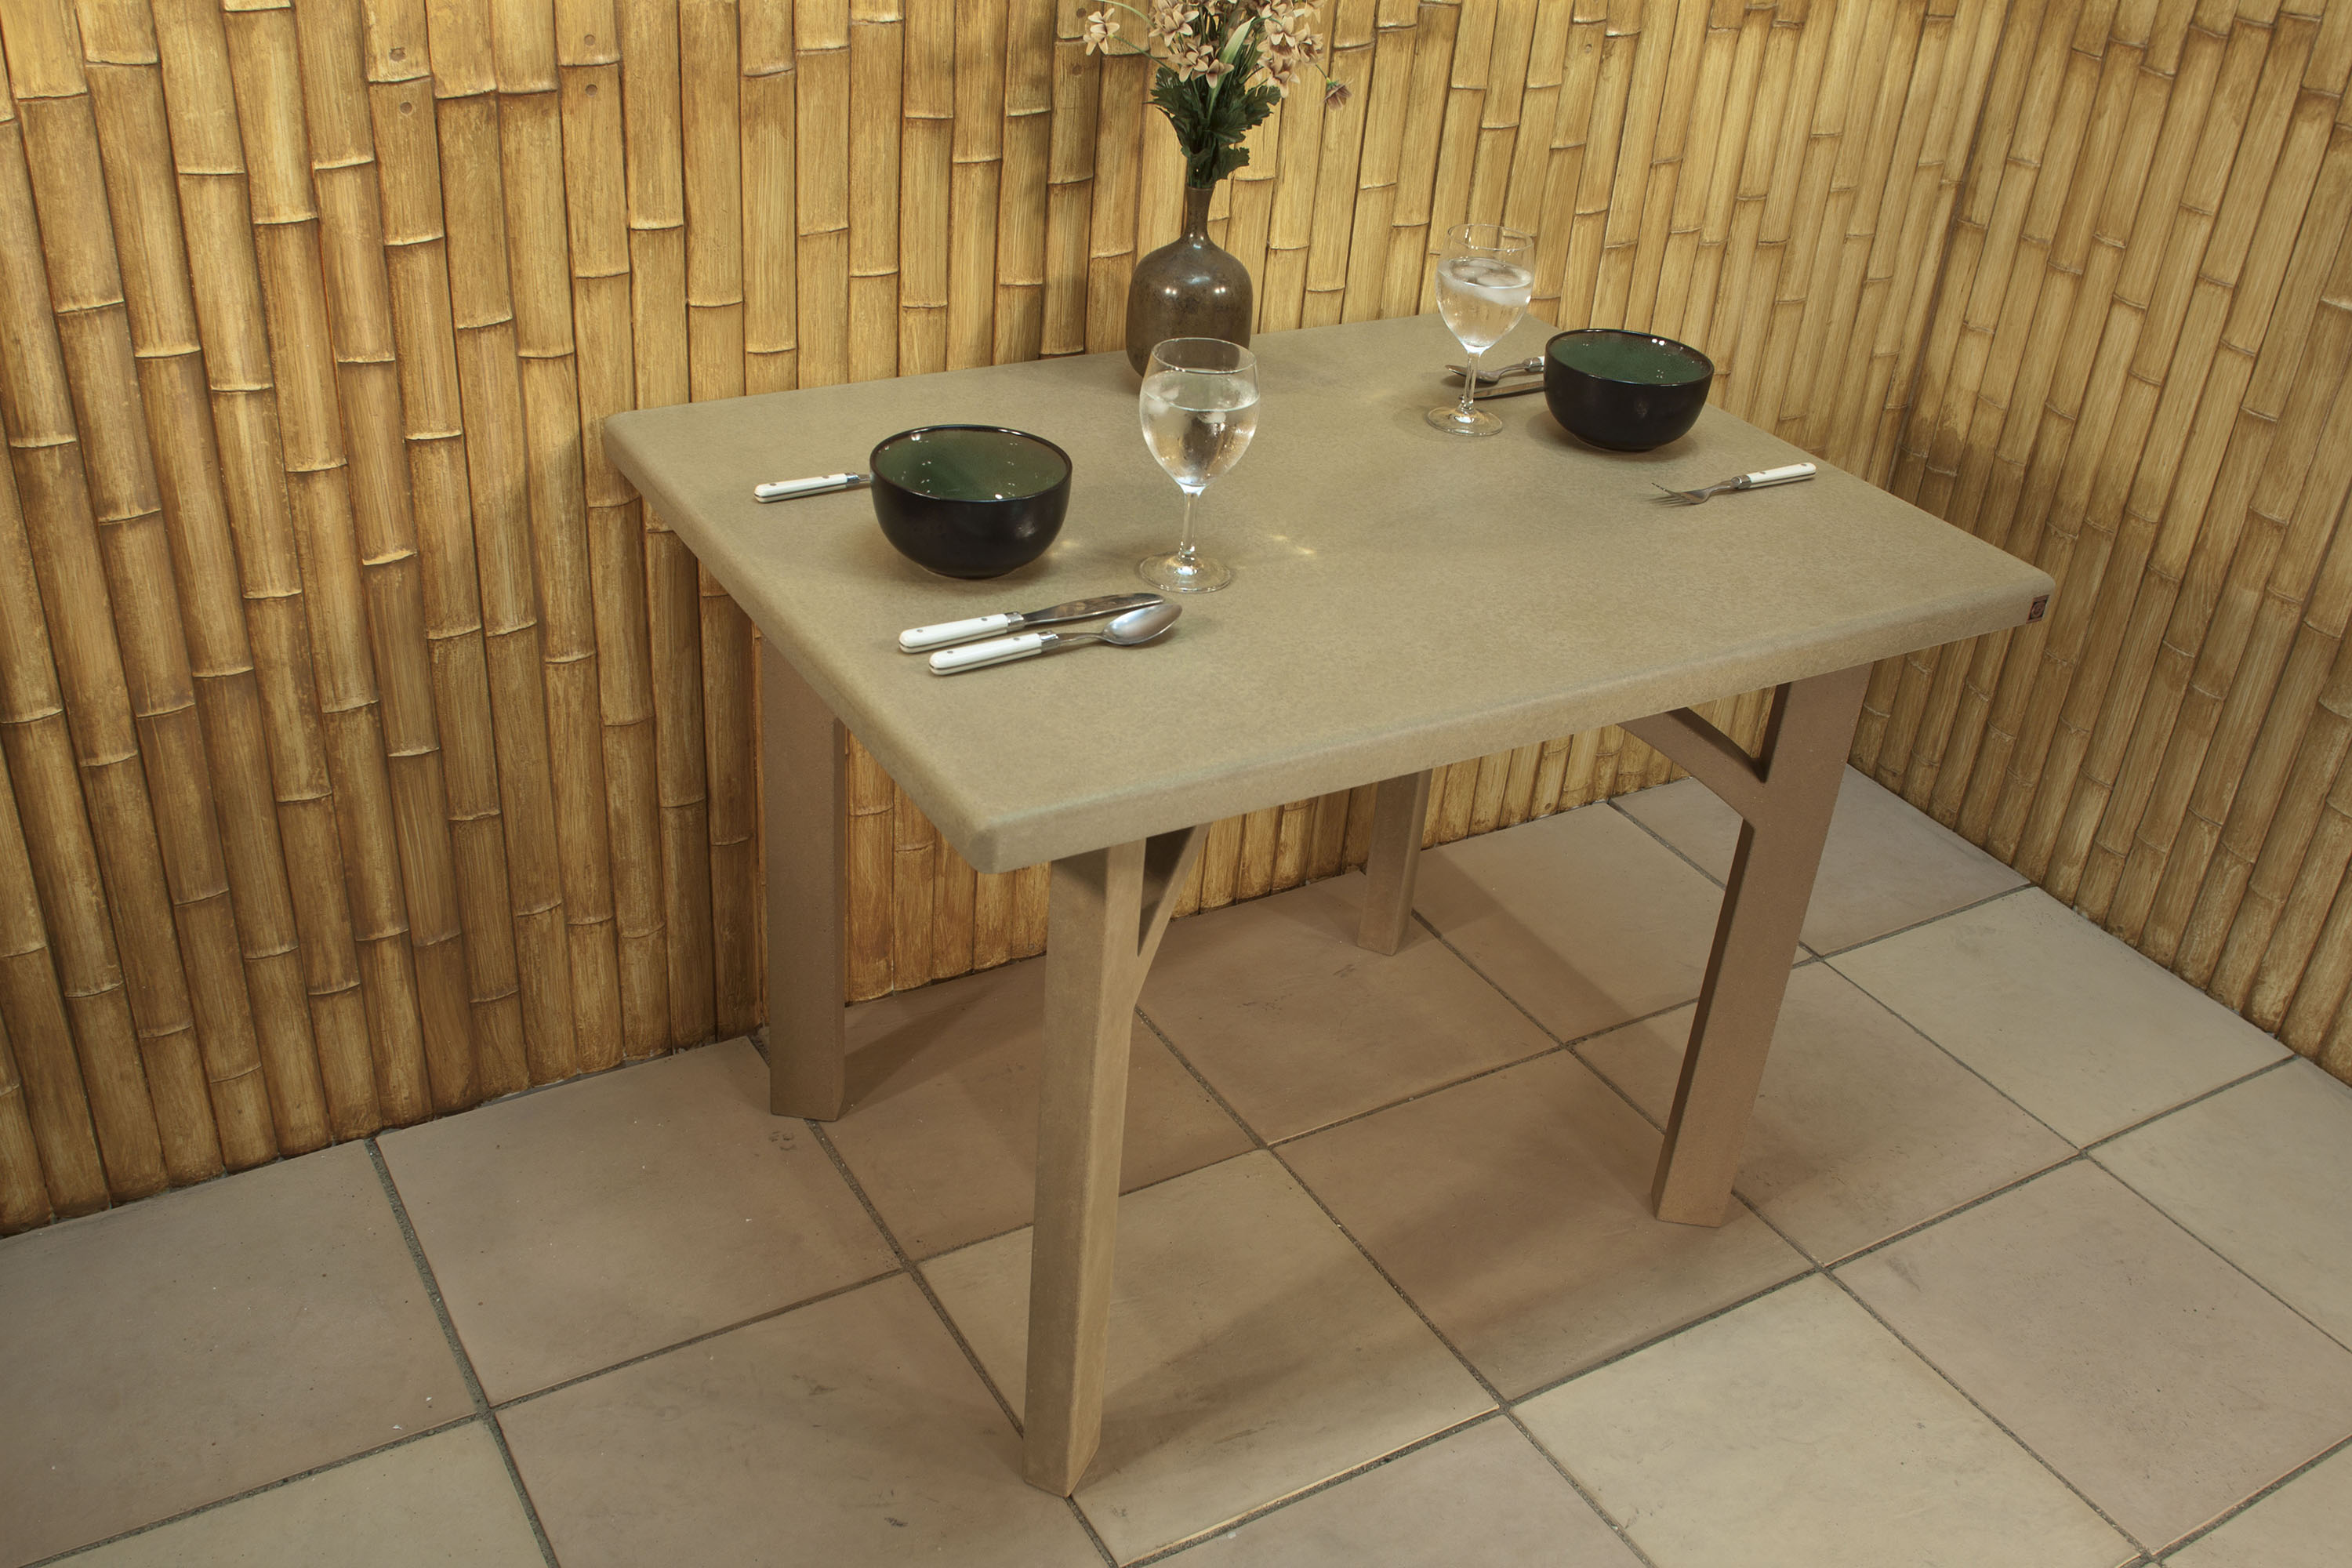 All Concrete! 'FourTop' Table & Legs, TruEdge Pavers, Bamboo Cladding